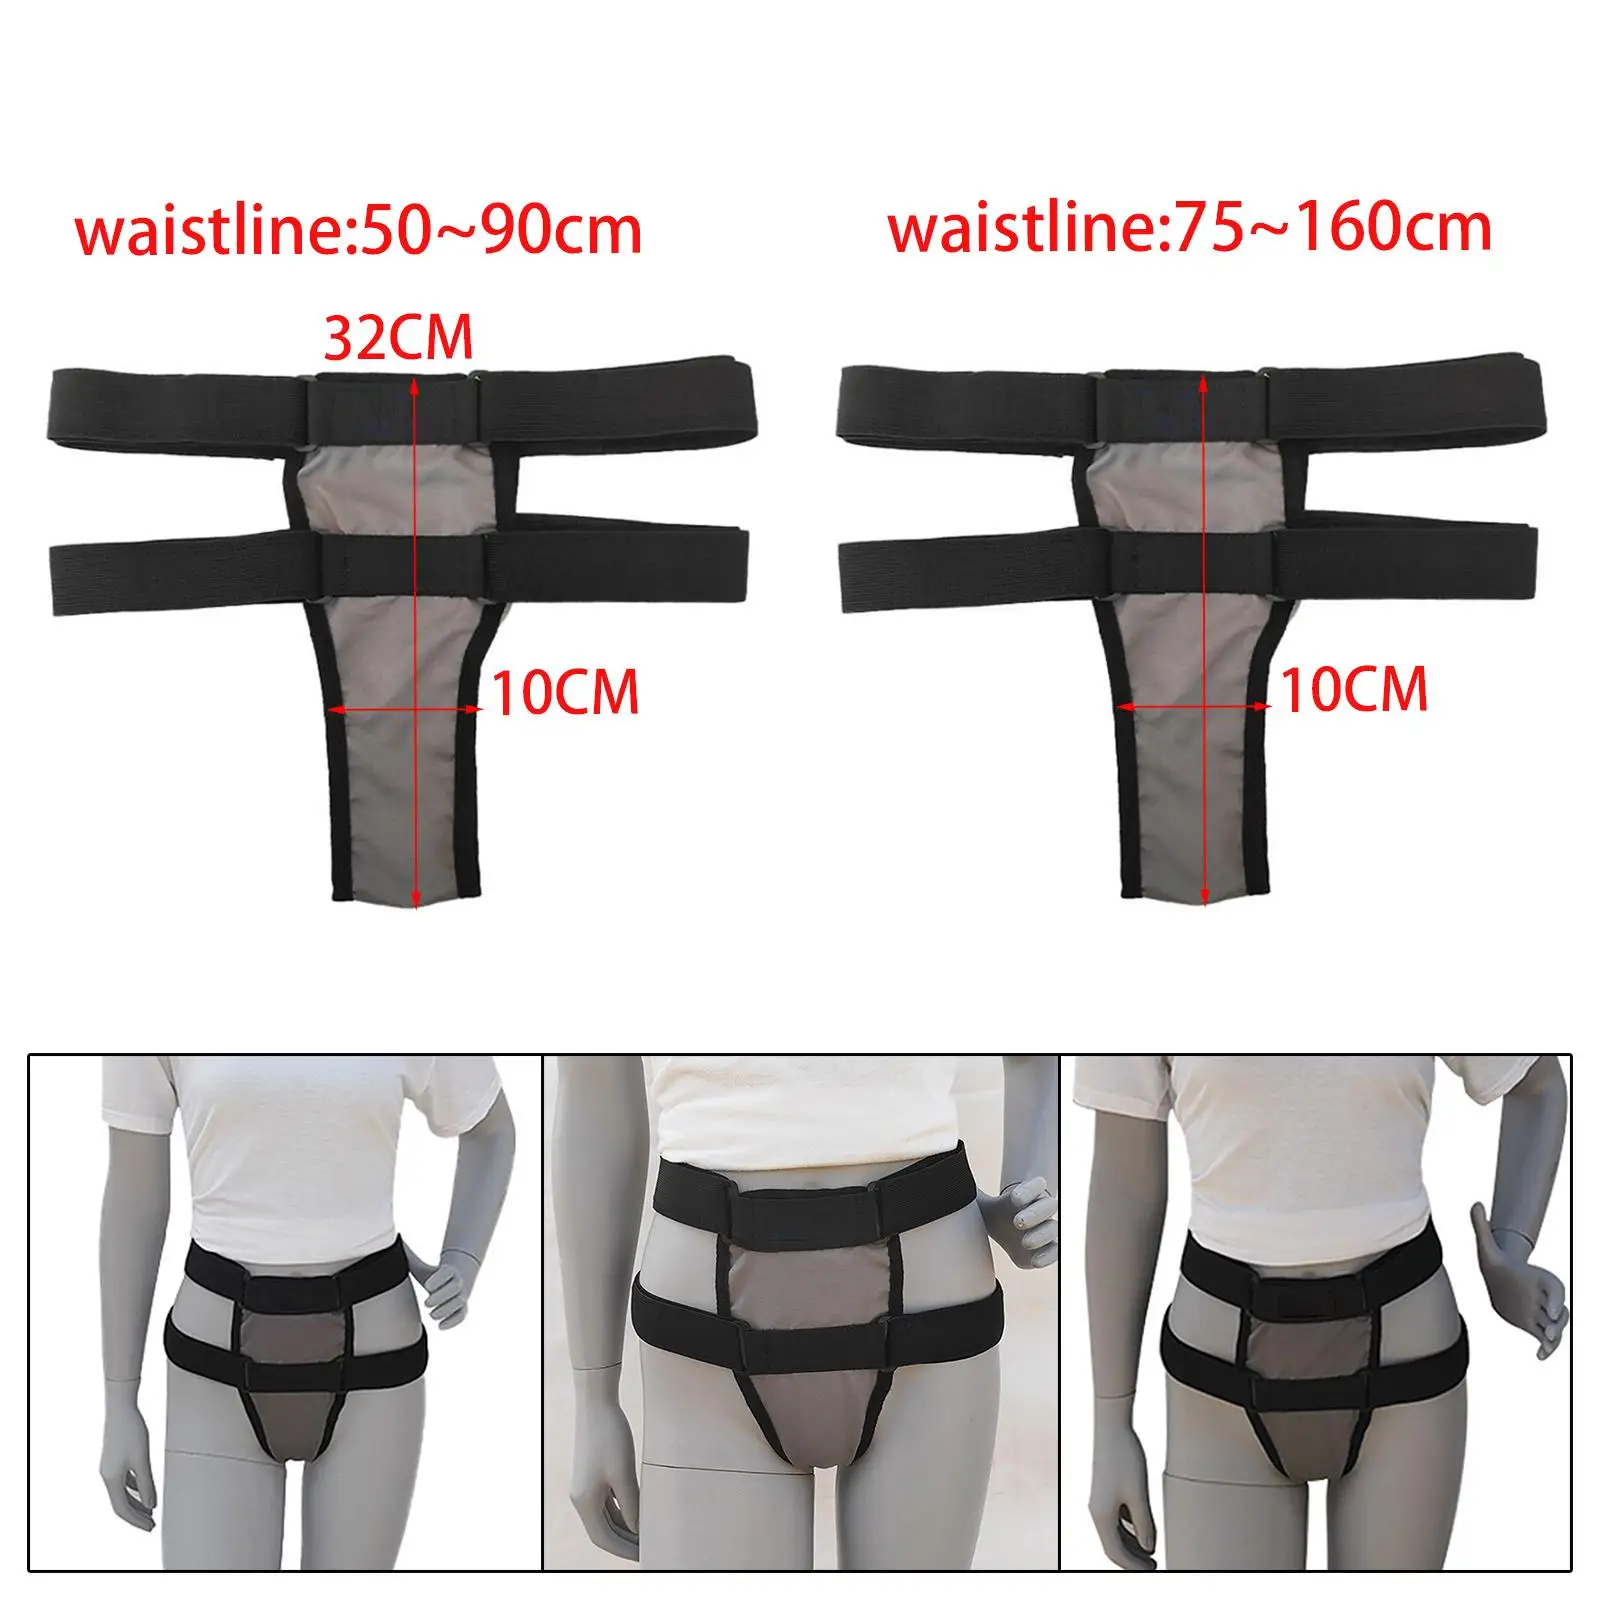 Pelvic Support Belt Accessory Durable Recovery Belly Band for Dysfunction Prolapse Postpartum Care Treating Women